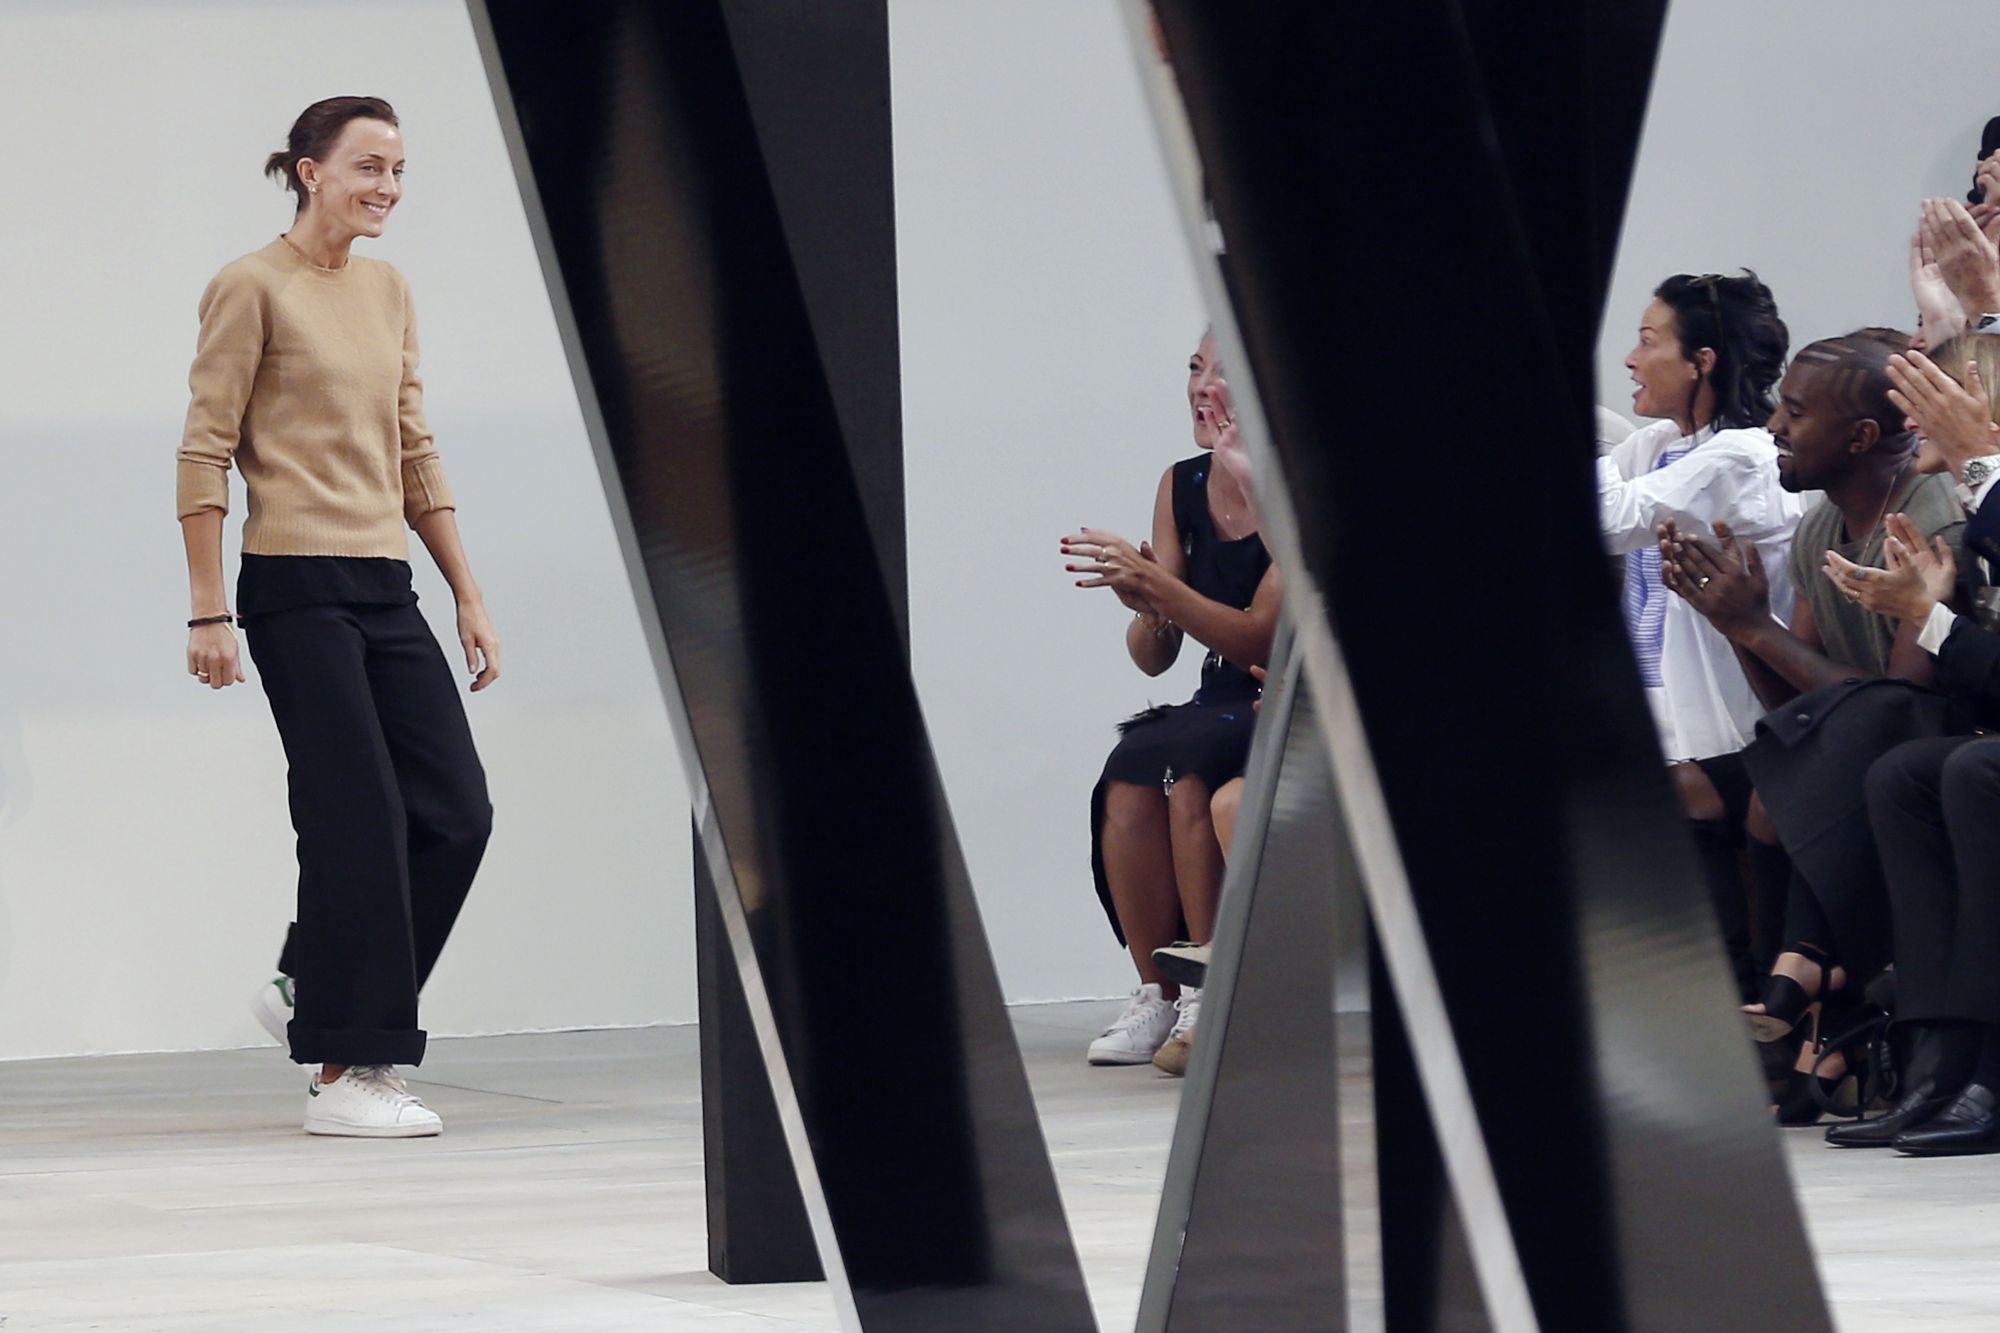 Phoebe Philo is launching her new fashion label in September